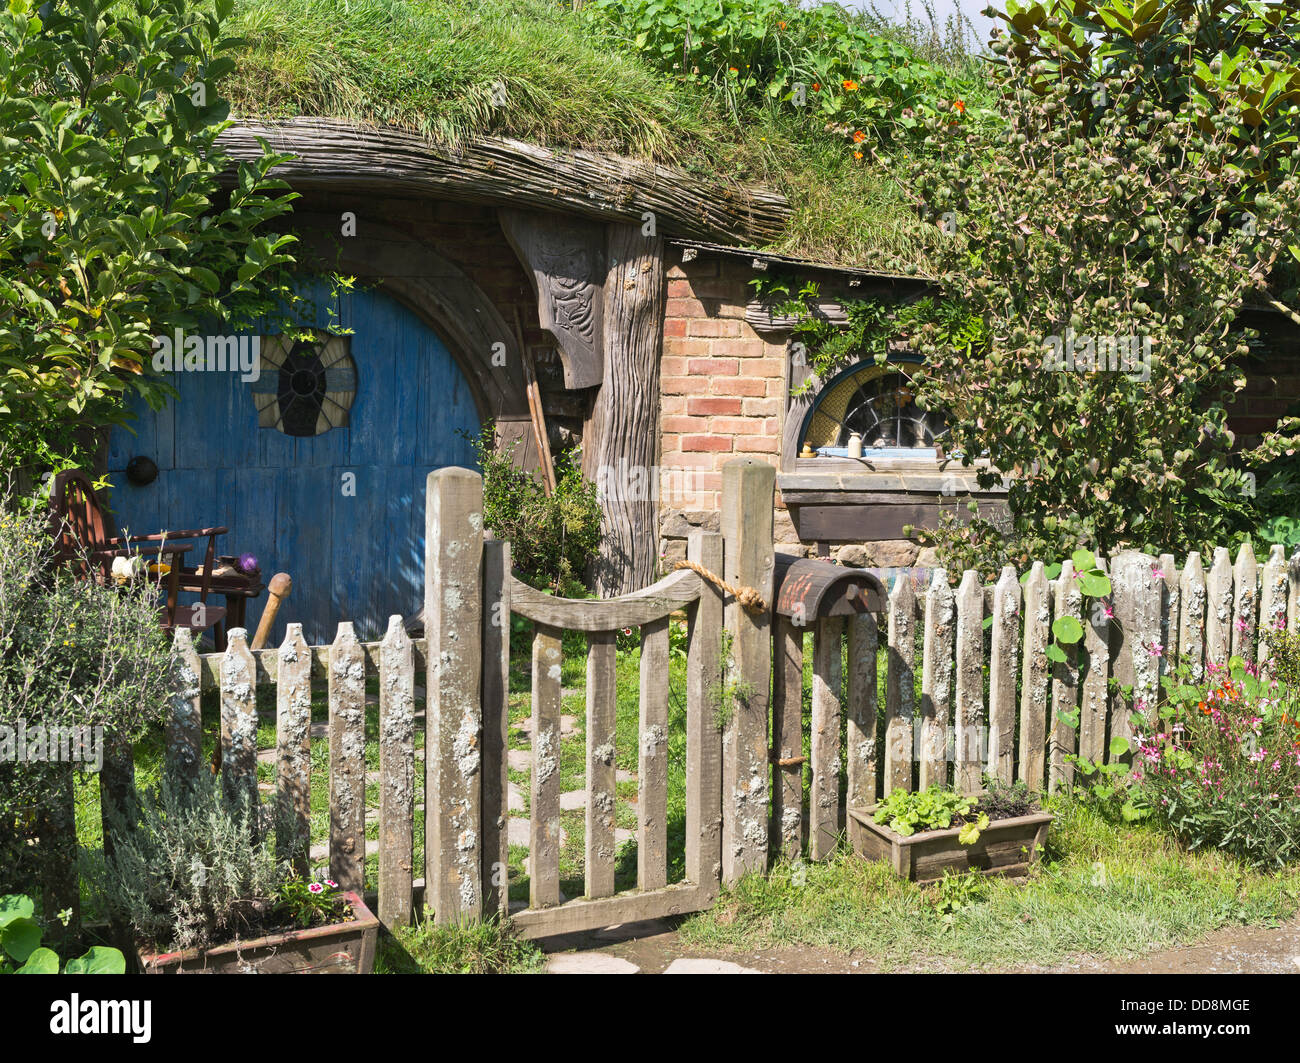 dh Lord of the Rings HOBBITON NEW ZEALAND Hobbits cottage door film set movie site Lord of the Rings films hobbit Stock Photo